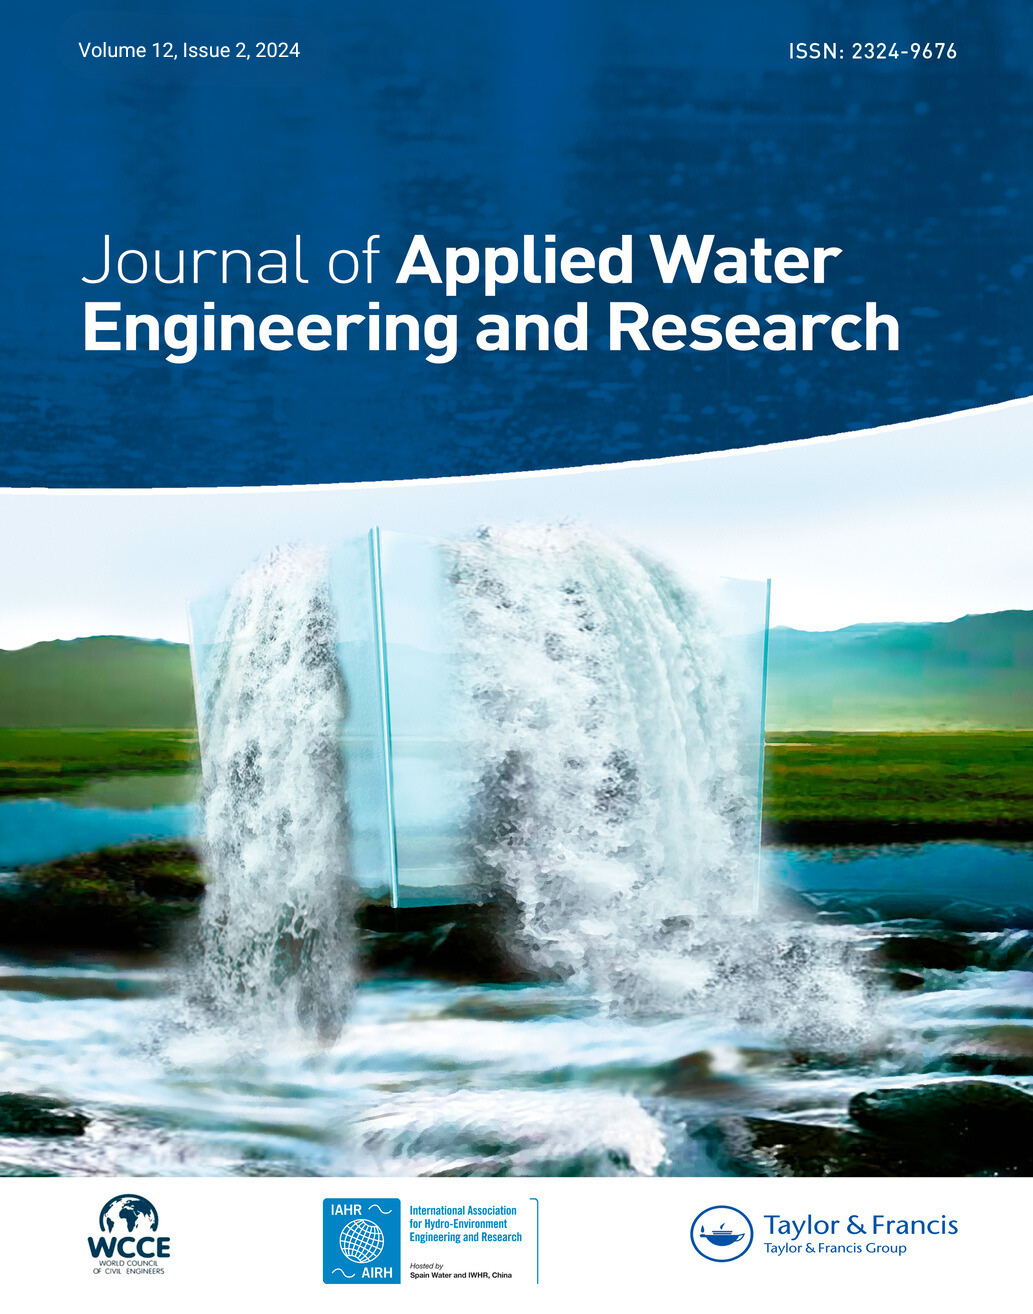 Journal of Applied Water Engineering and Research| Vol. 12. Issue 2, 2024